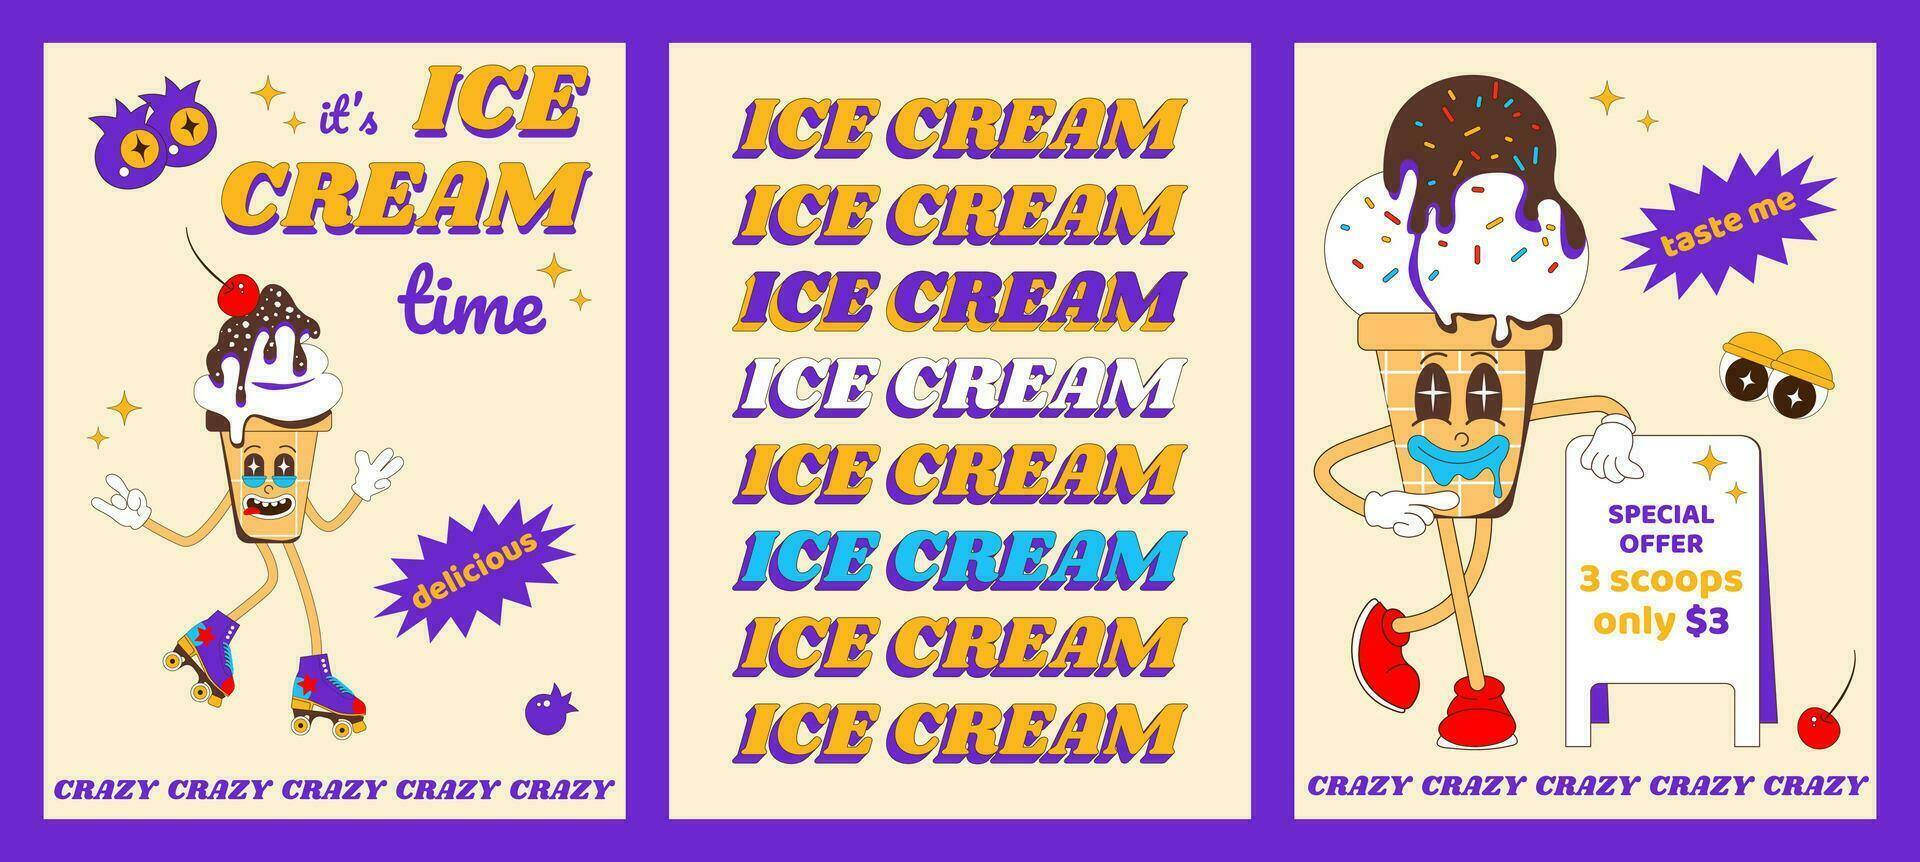 Set of posters with ice cream character. Funny ice cream mascot for cafe, restaurant. Vector illustration in psychedelic retro style.